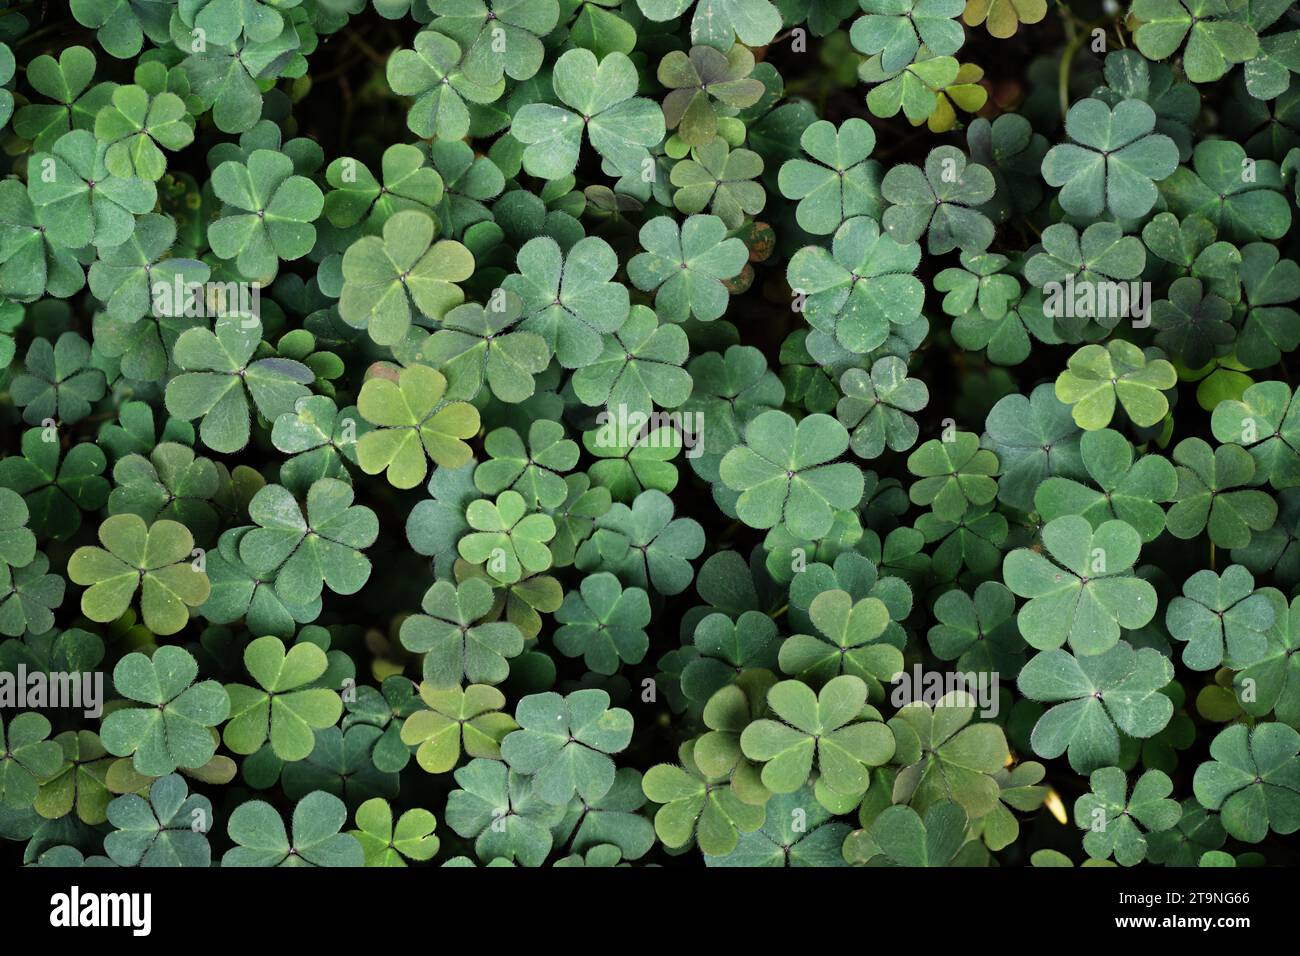 Shamrock leaf wallpaper. St. Patrick's holiday greeting card. Three-leaved clover leaf background, symbol of st. Patrick's day. Stock Photo